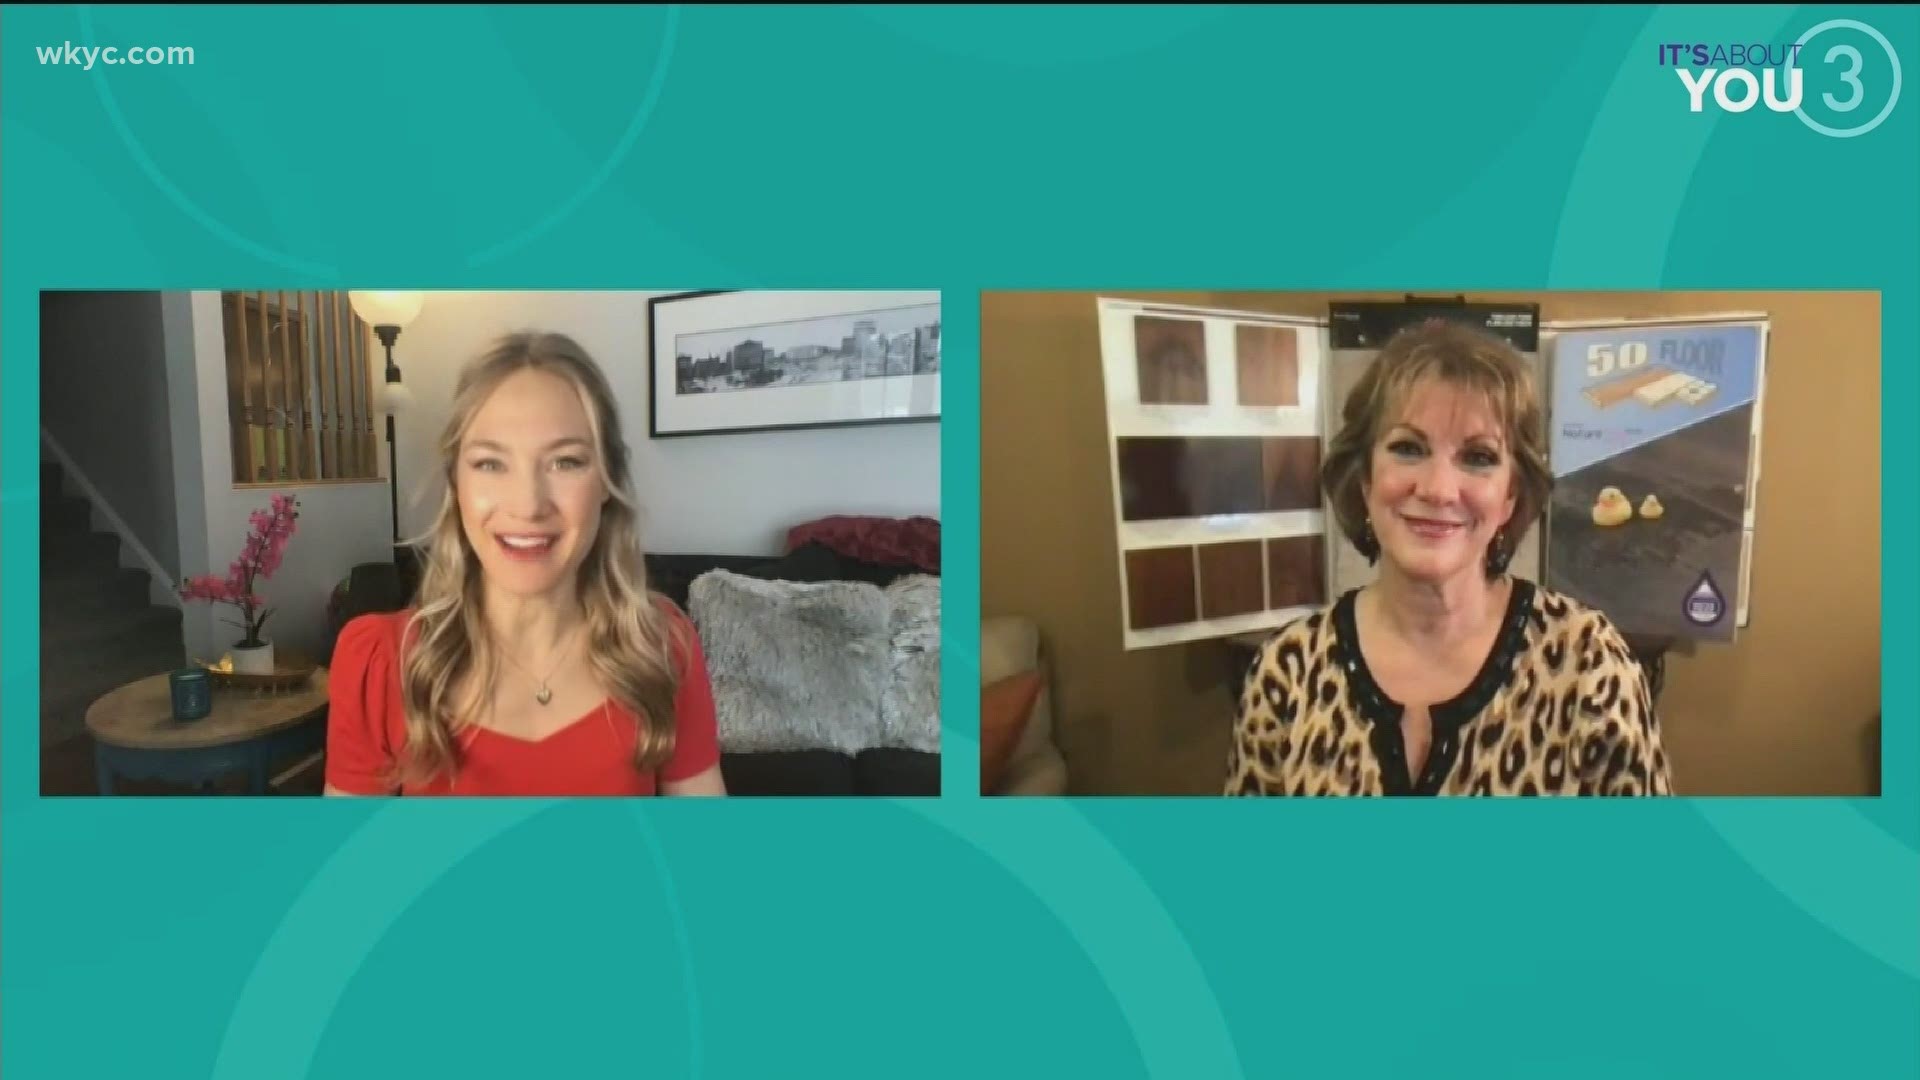 Judy Brown is here and talks with Alexa about a great way to brighten up your home with 50 Floor! Their March Special just started and it has the word FREE in it!